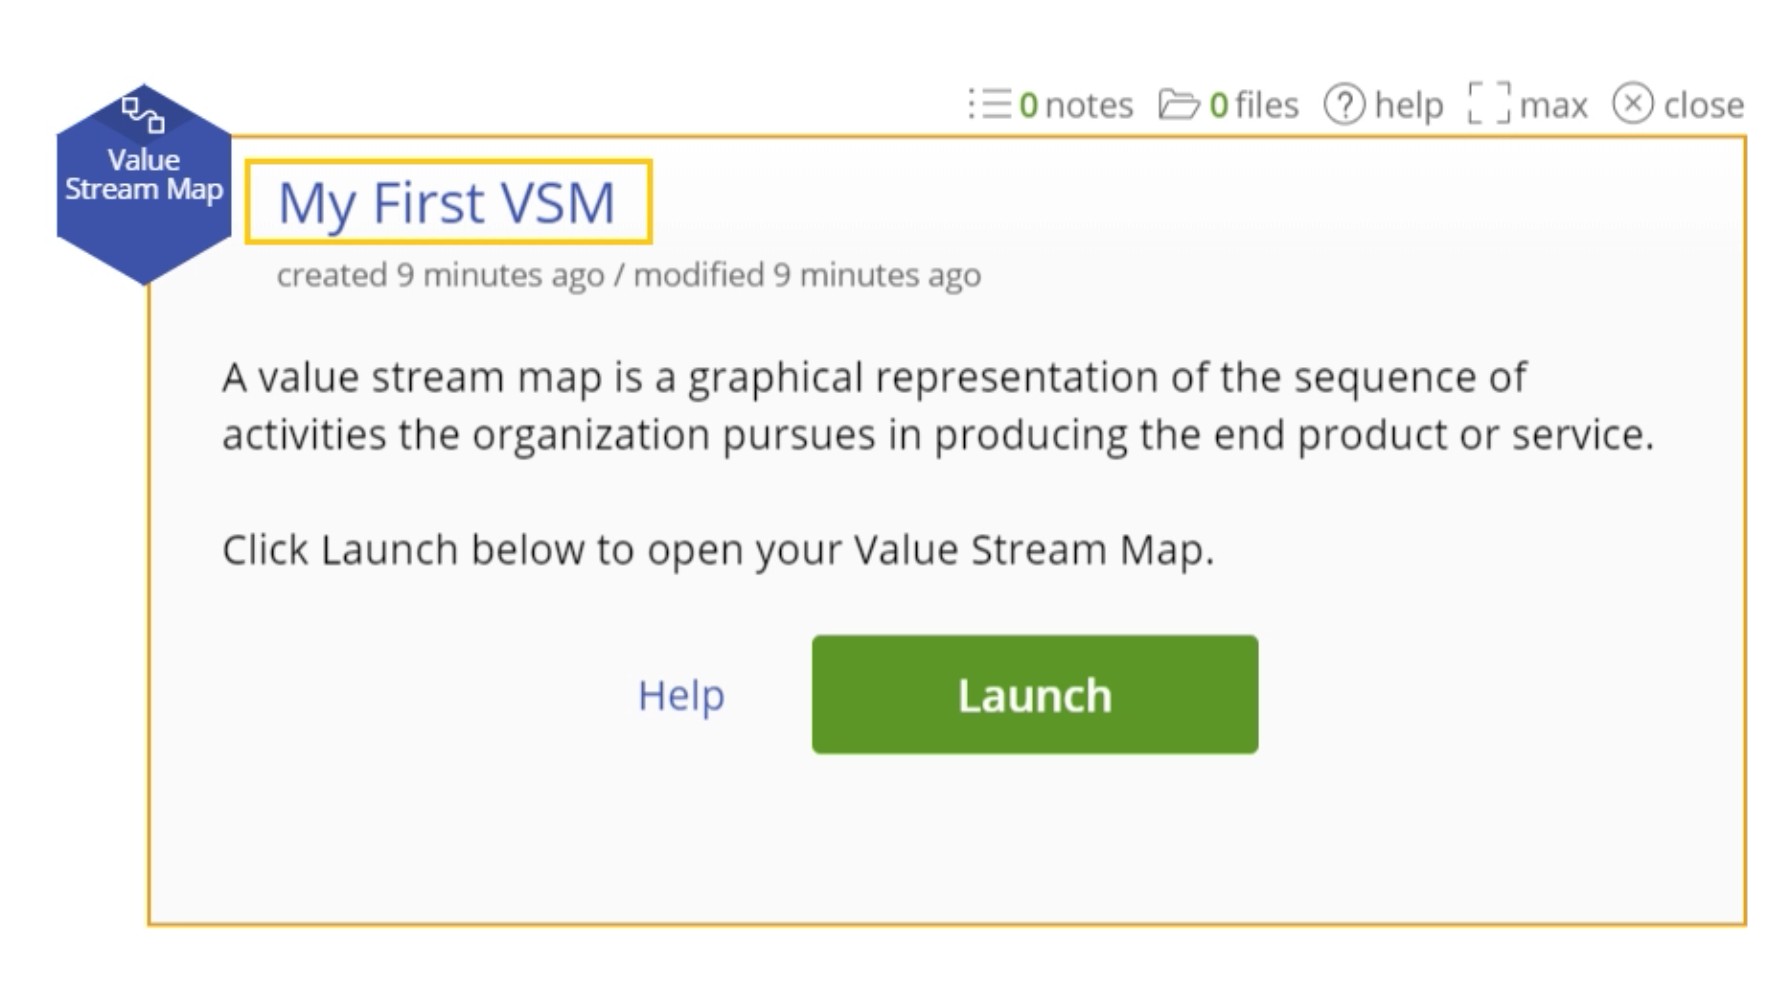 Value stream launch map menu with changed name.